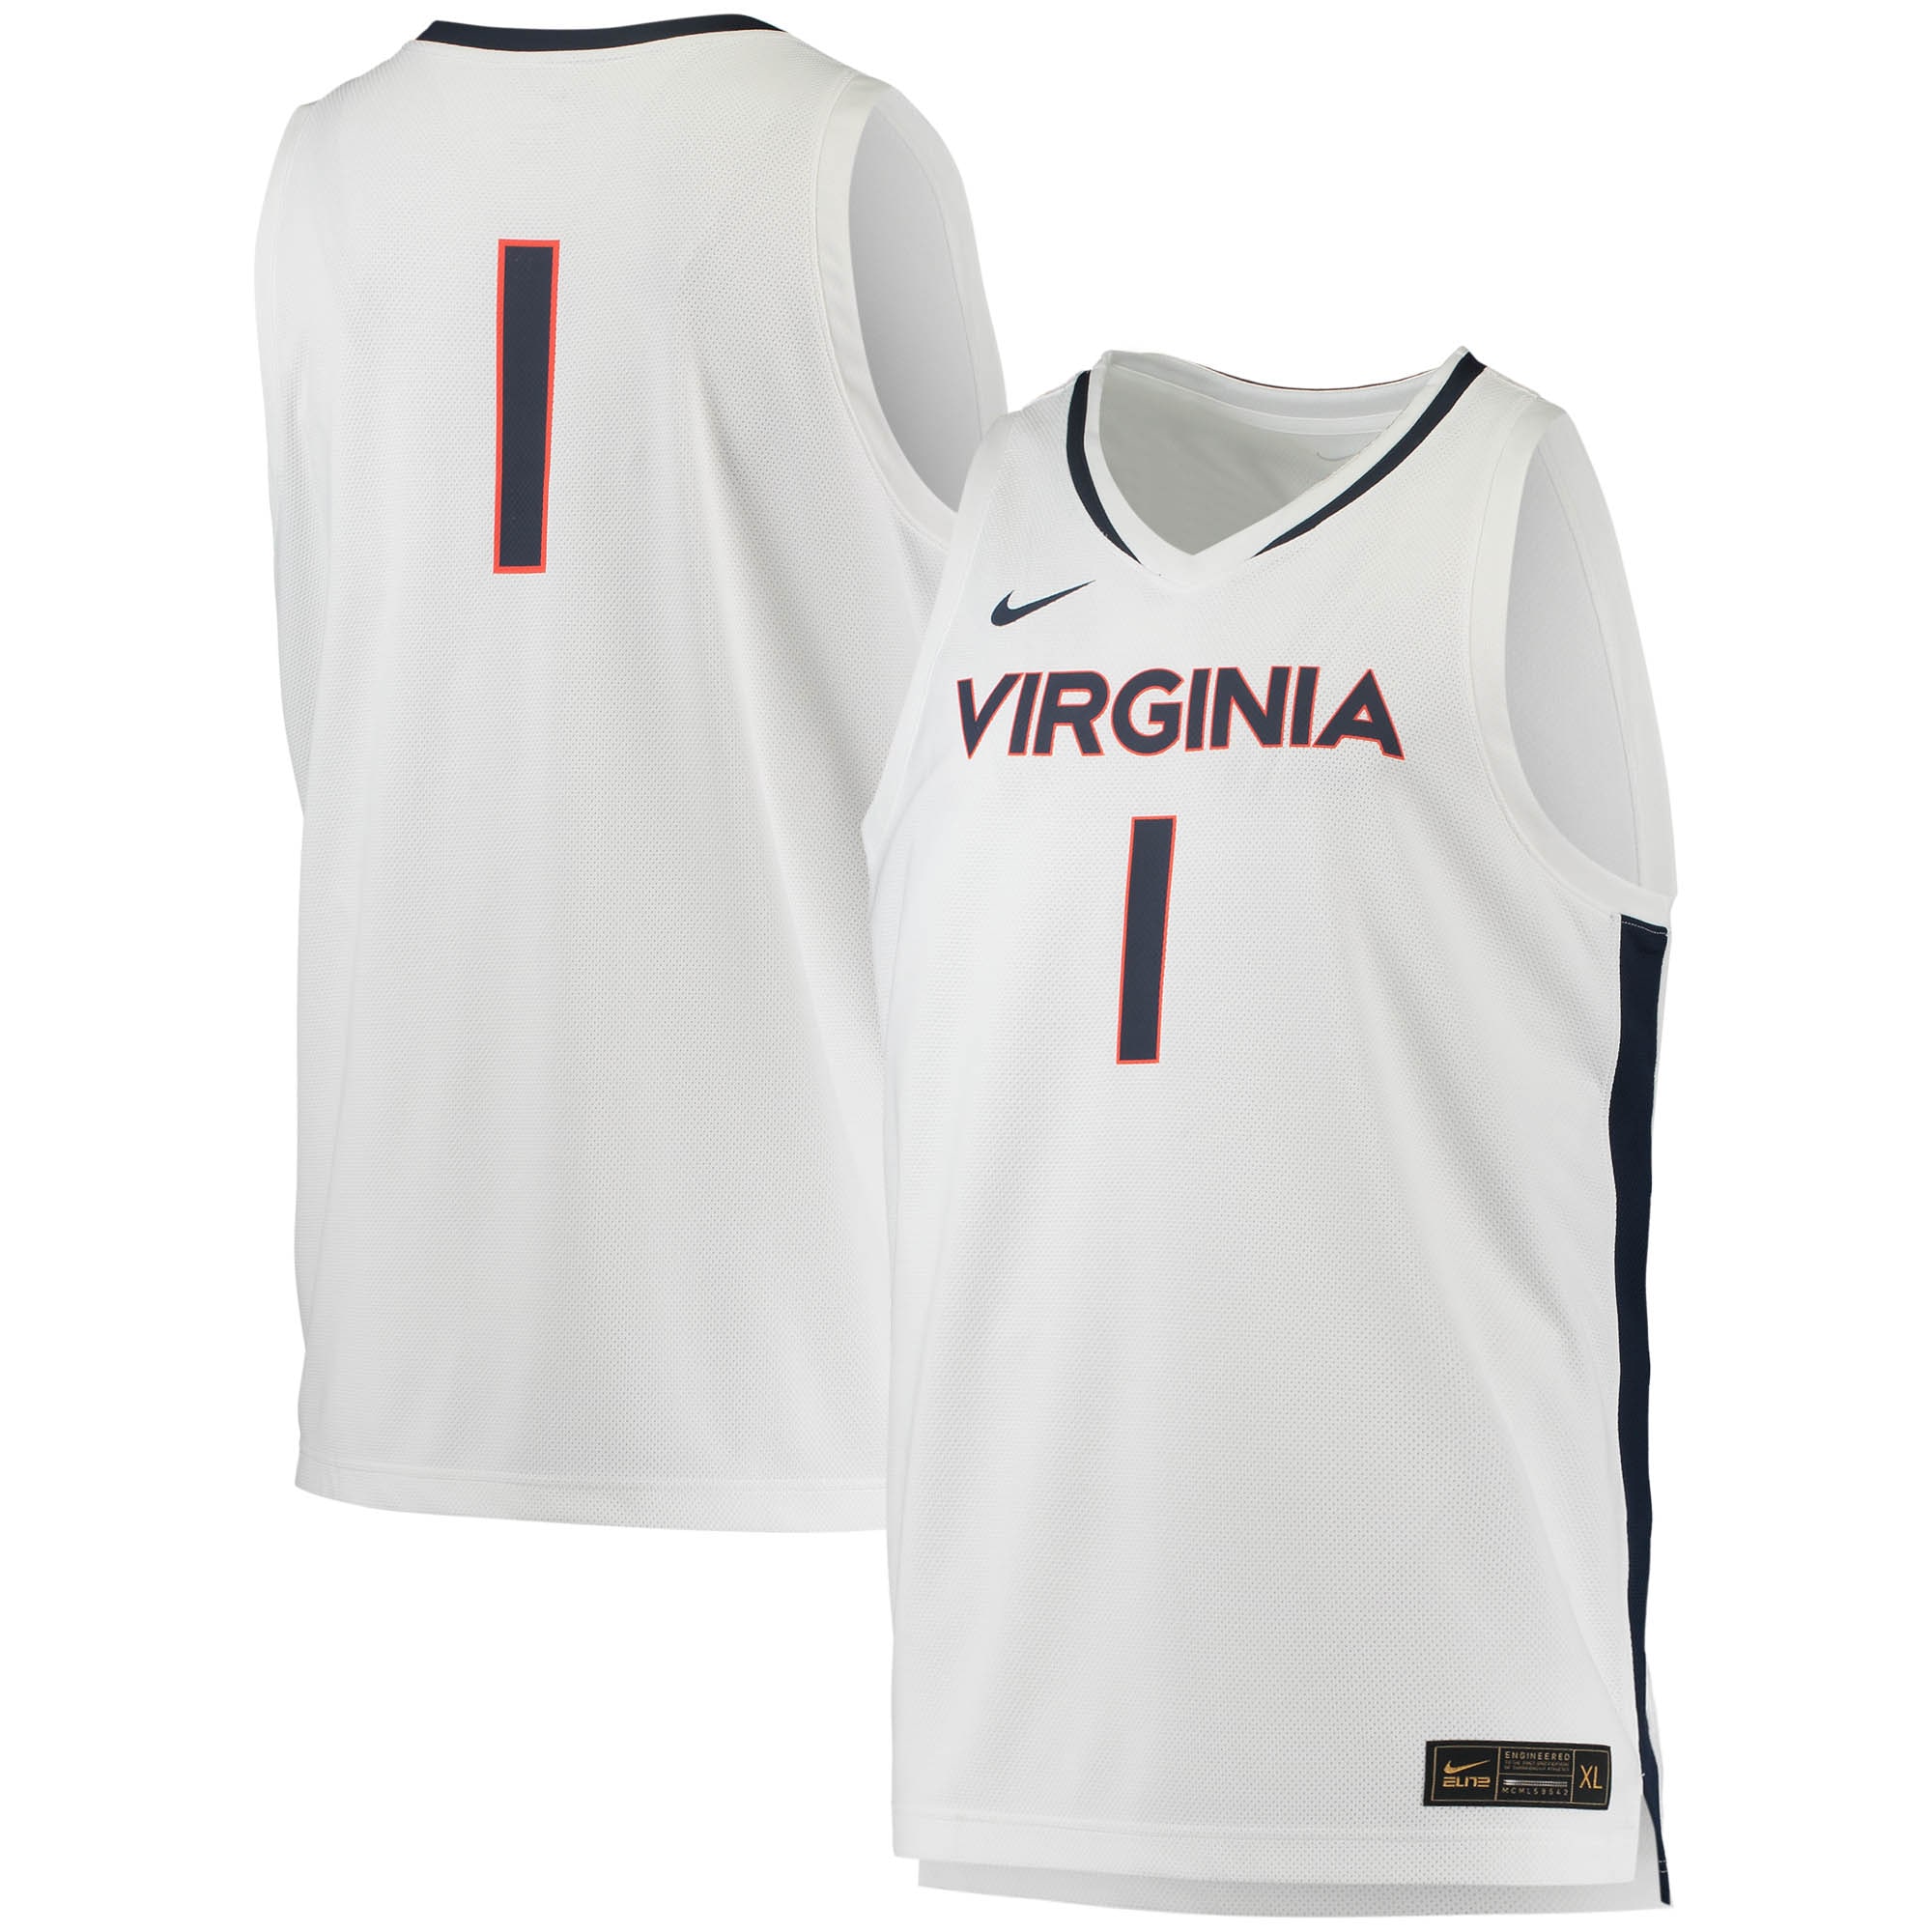 #1 Virginia Cavaliers Replica Basketball Jersey - White For Youth Women Men